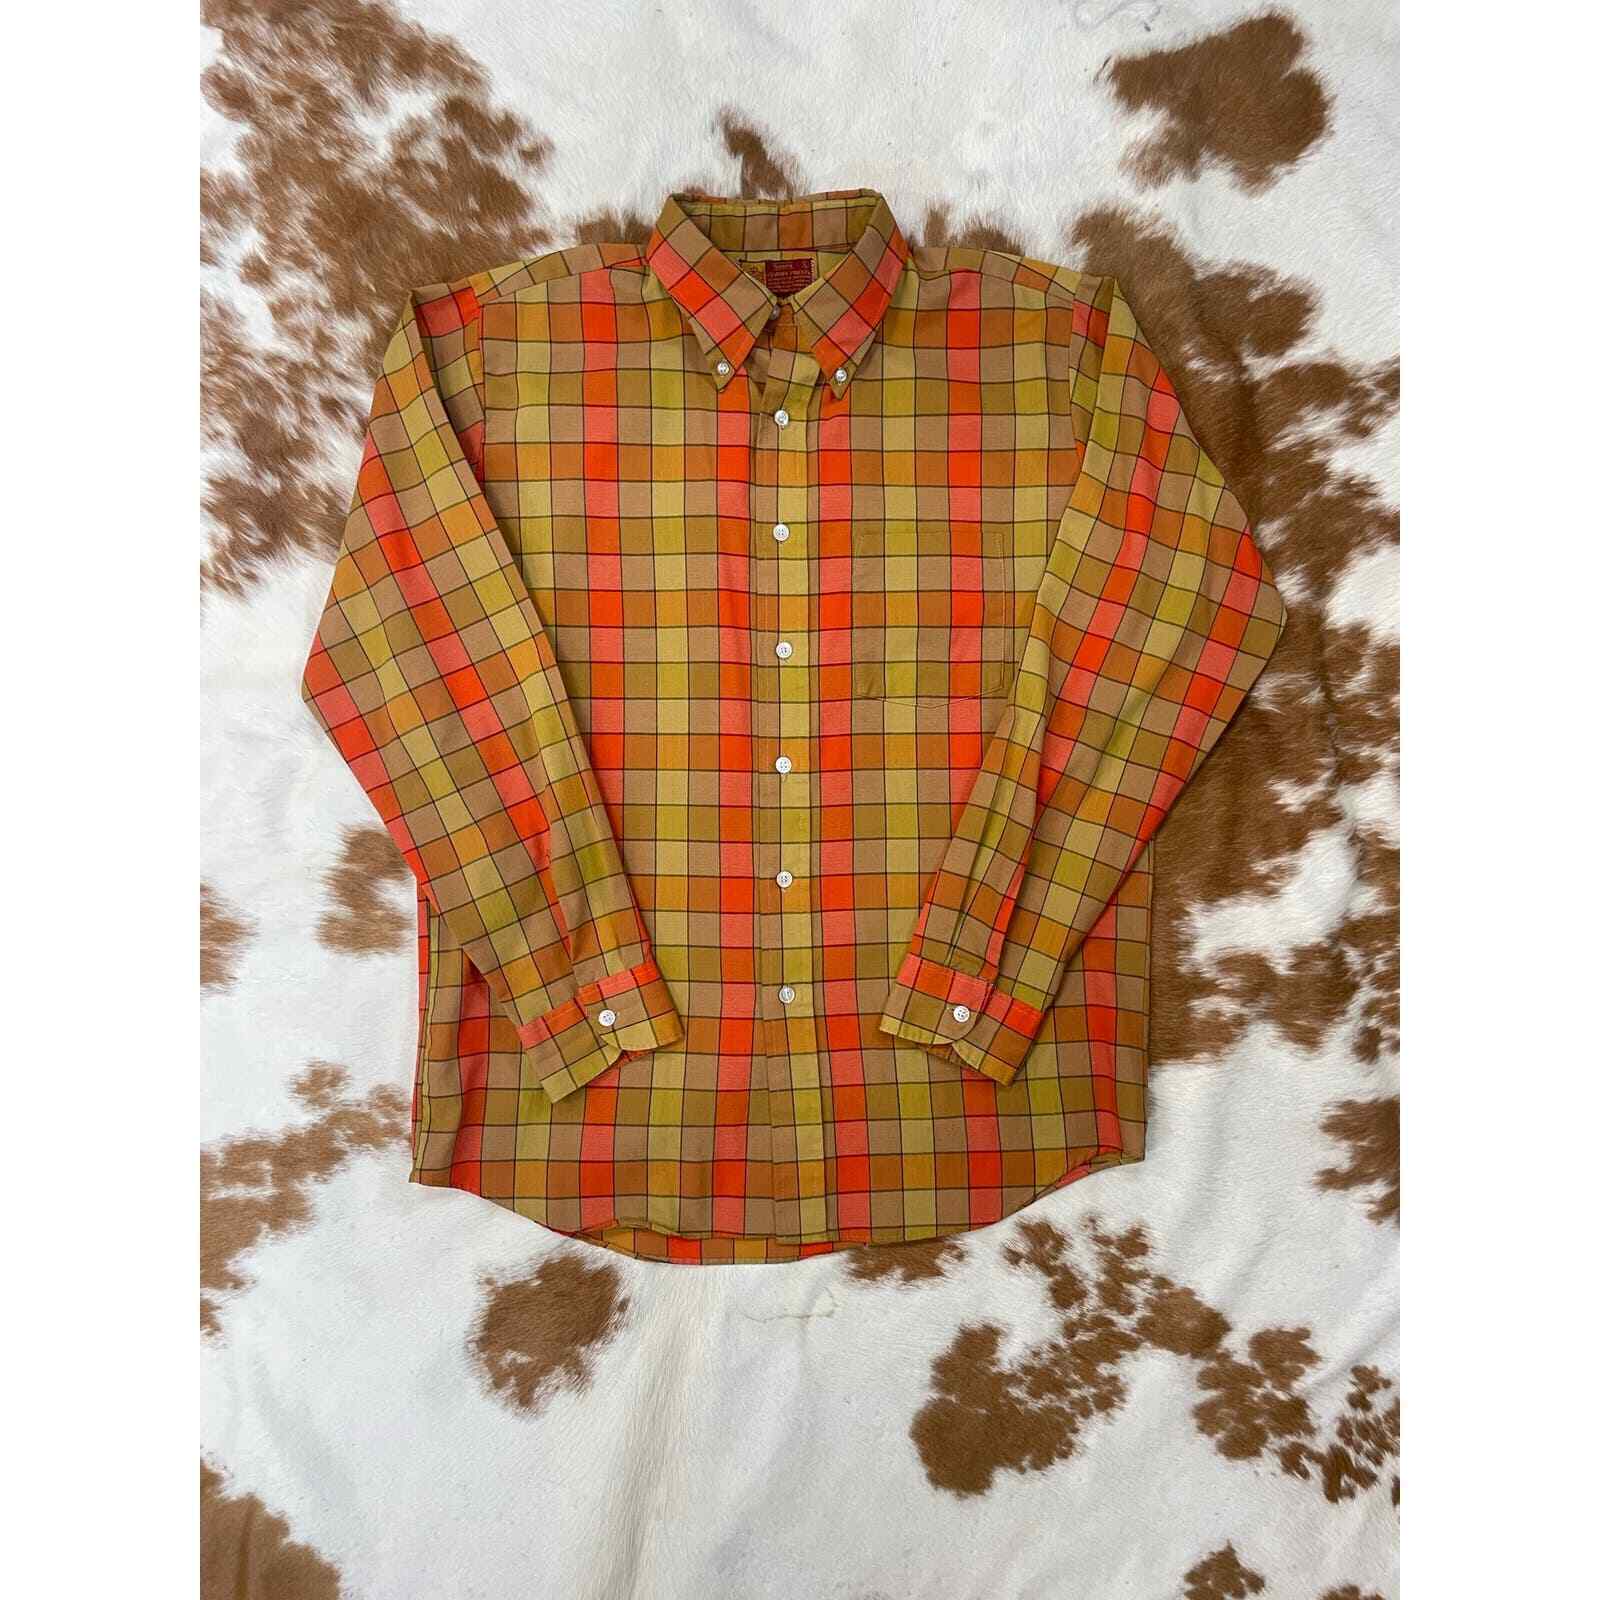 Vintage 1970s Sears Dagger Collar Button Up